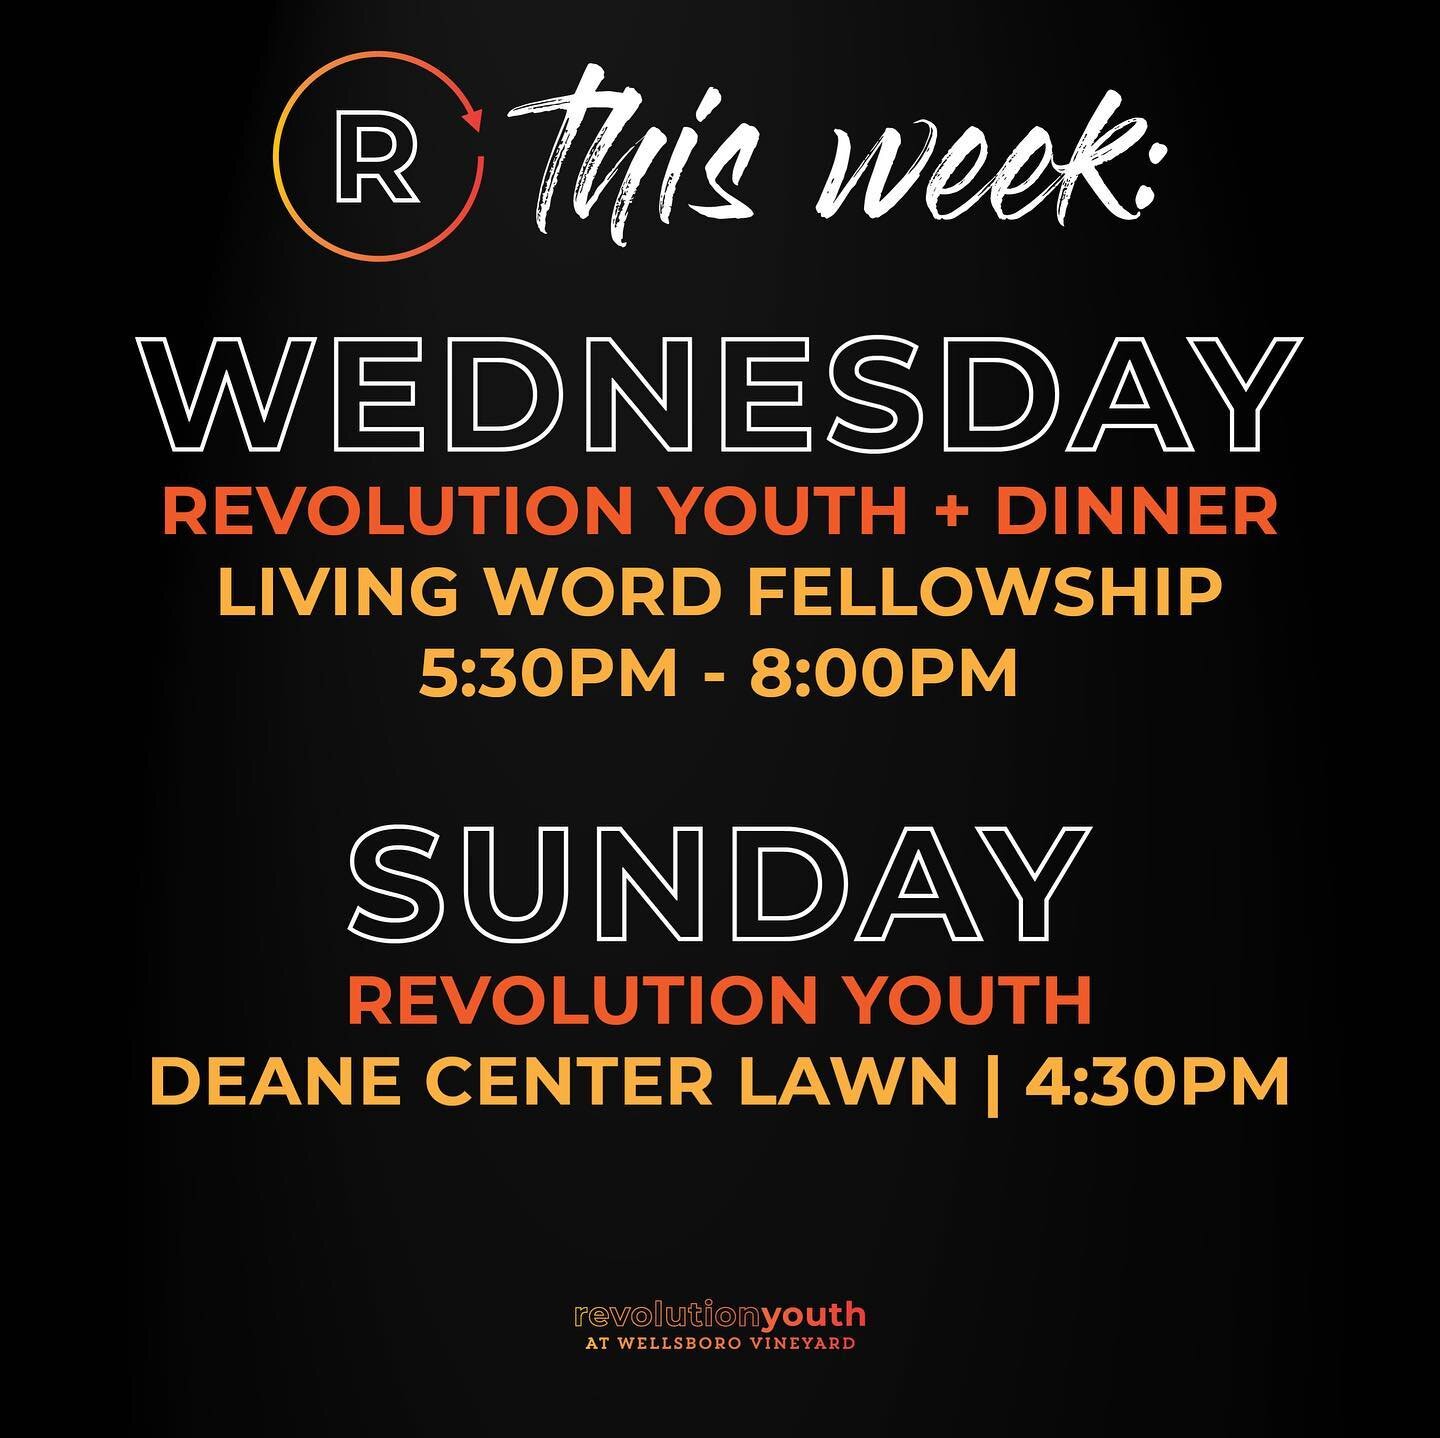 REVOLUTION YOUTH  Here's what is happening this week!

On the menu this week is chili + all the toppings, bread, and dessert! Don't forget to wear your mask and we'll see you at Living Word tomorrow night! #revolutionyouthwellsboro